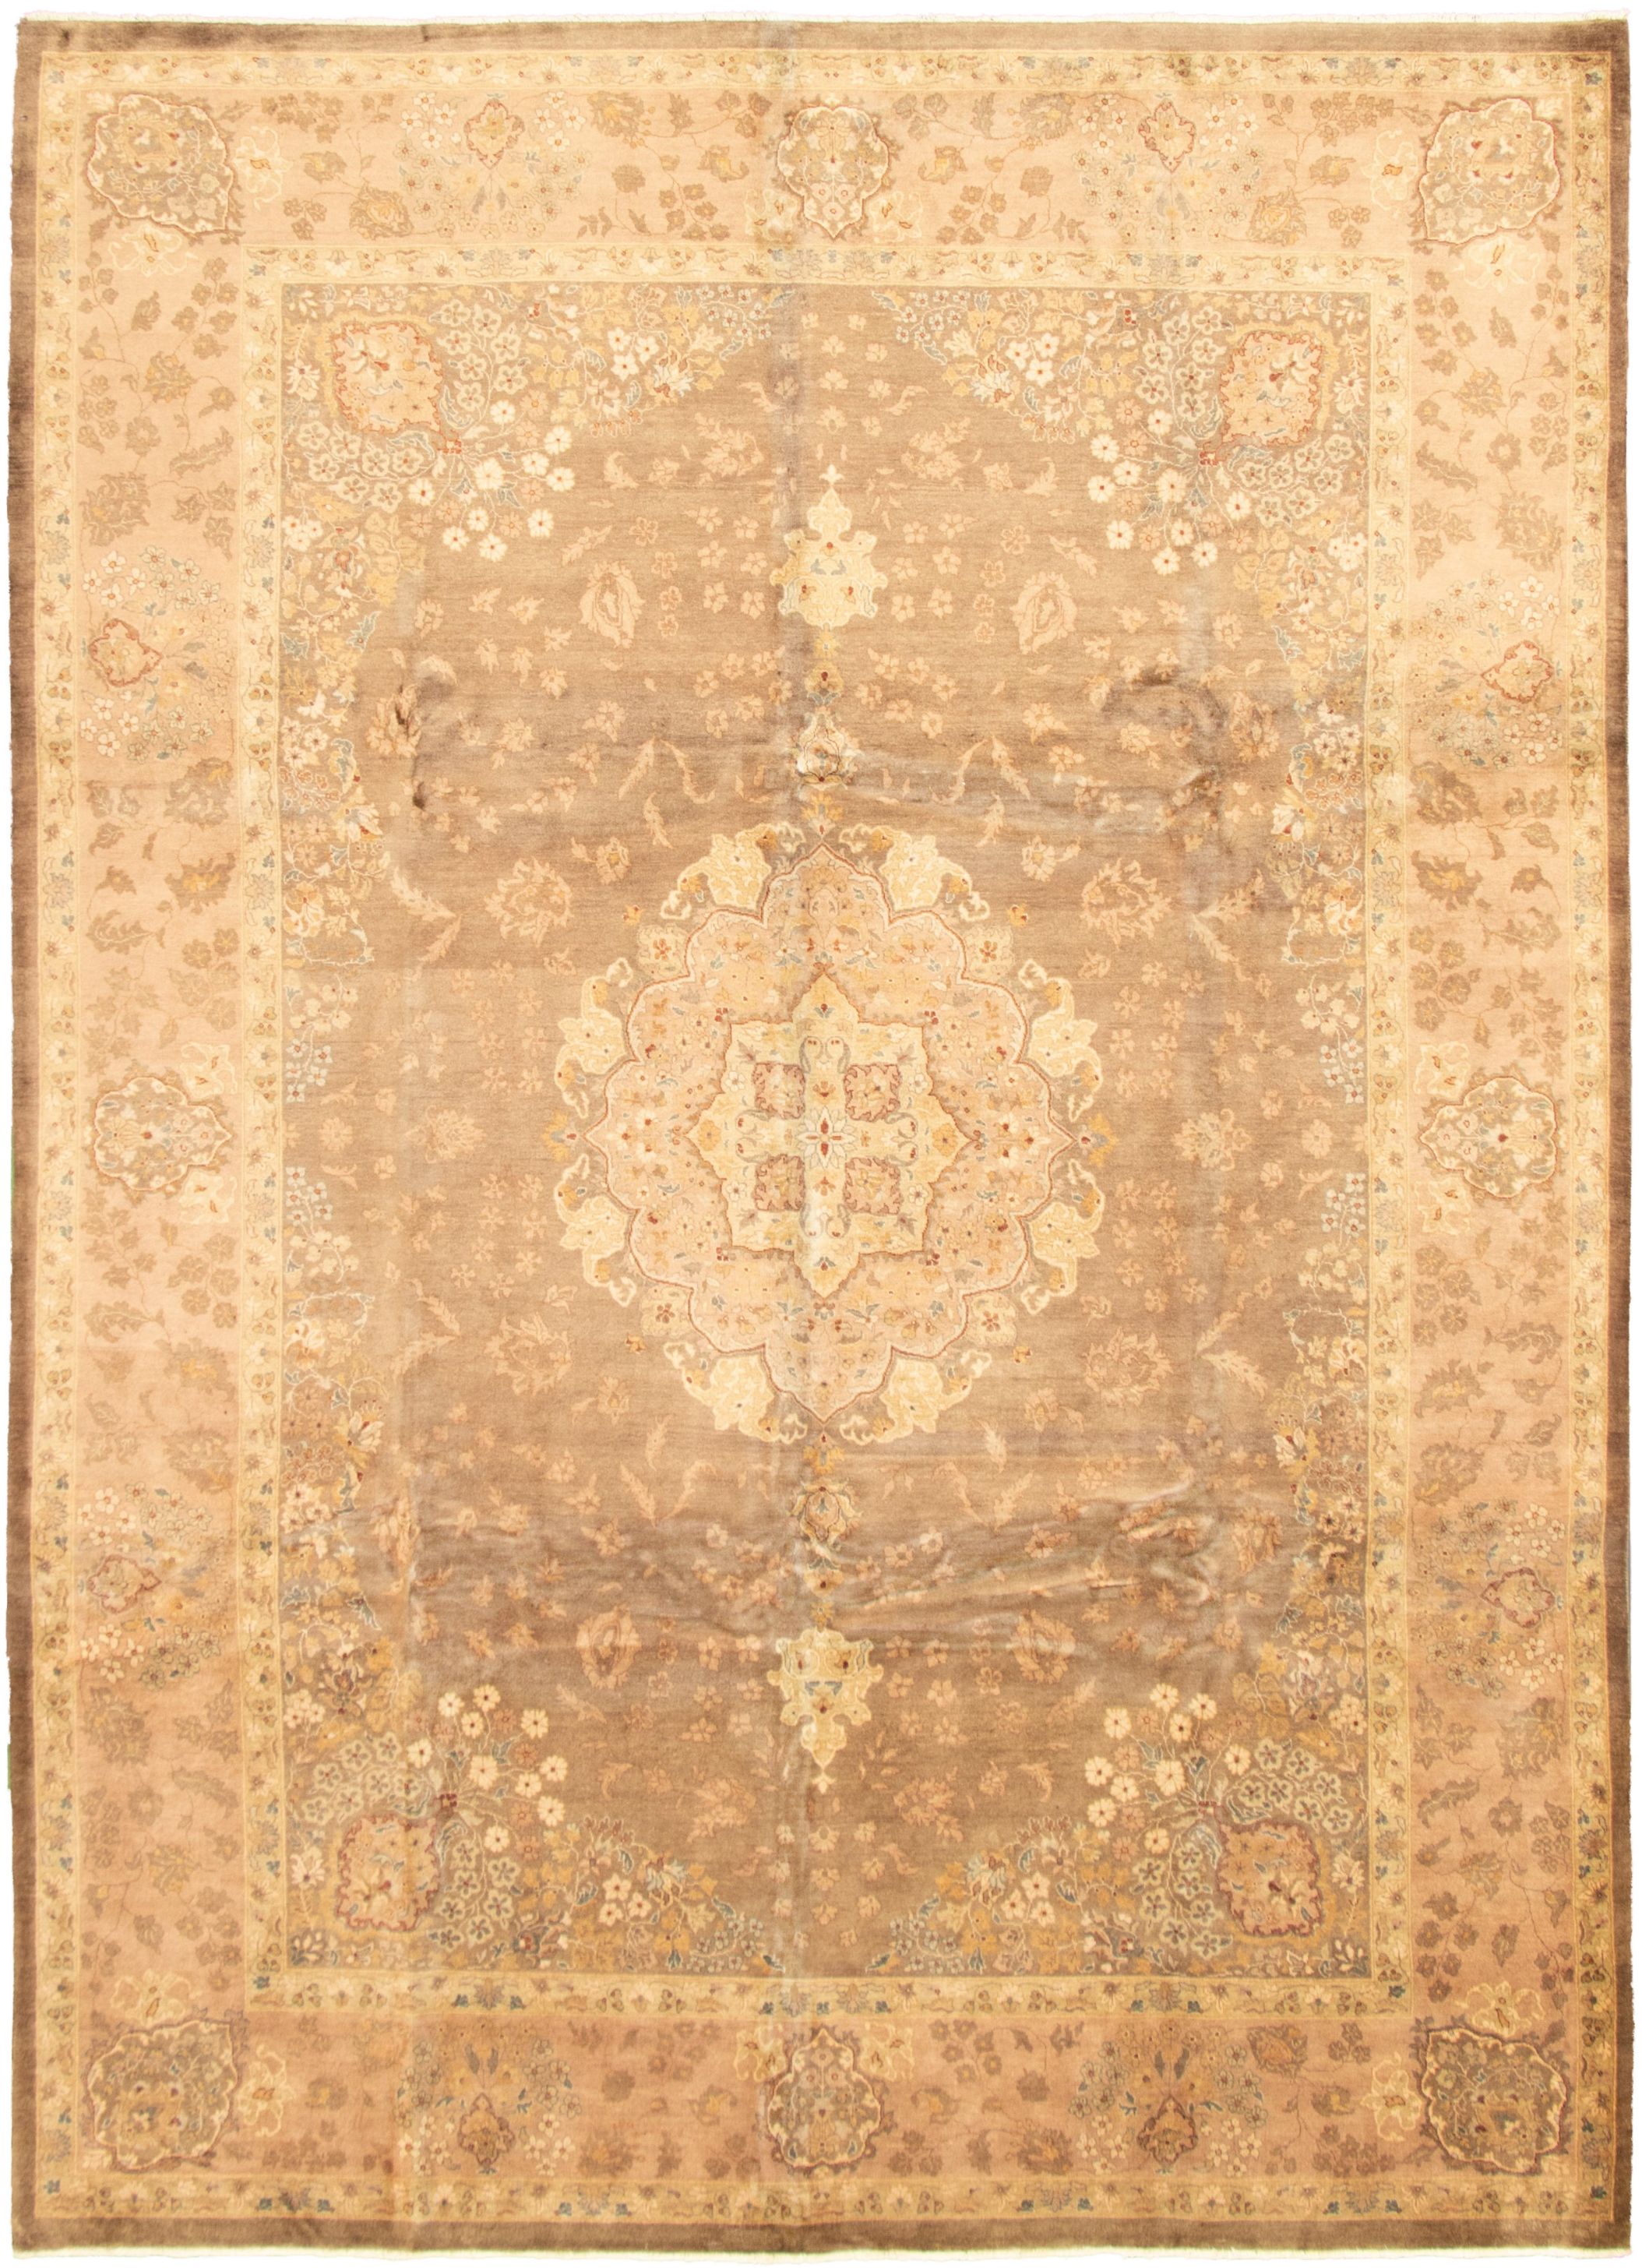 Hand-knotted Pako Persian 18/20 Brown Wool Rug 9'2" x 12'6" Size: 9'2" x 12'6"  